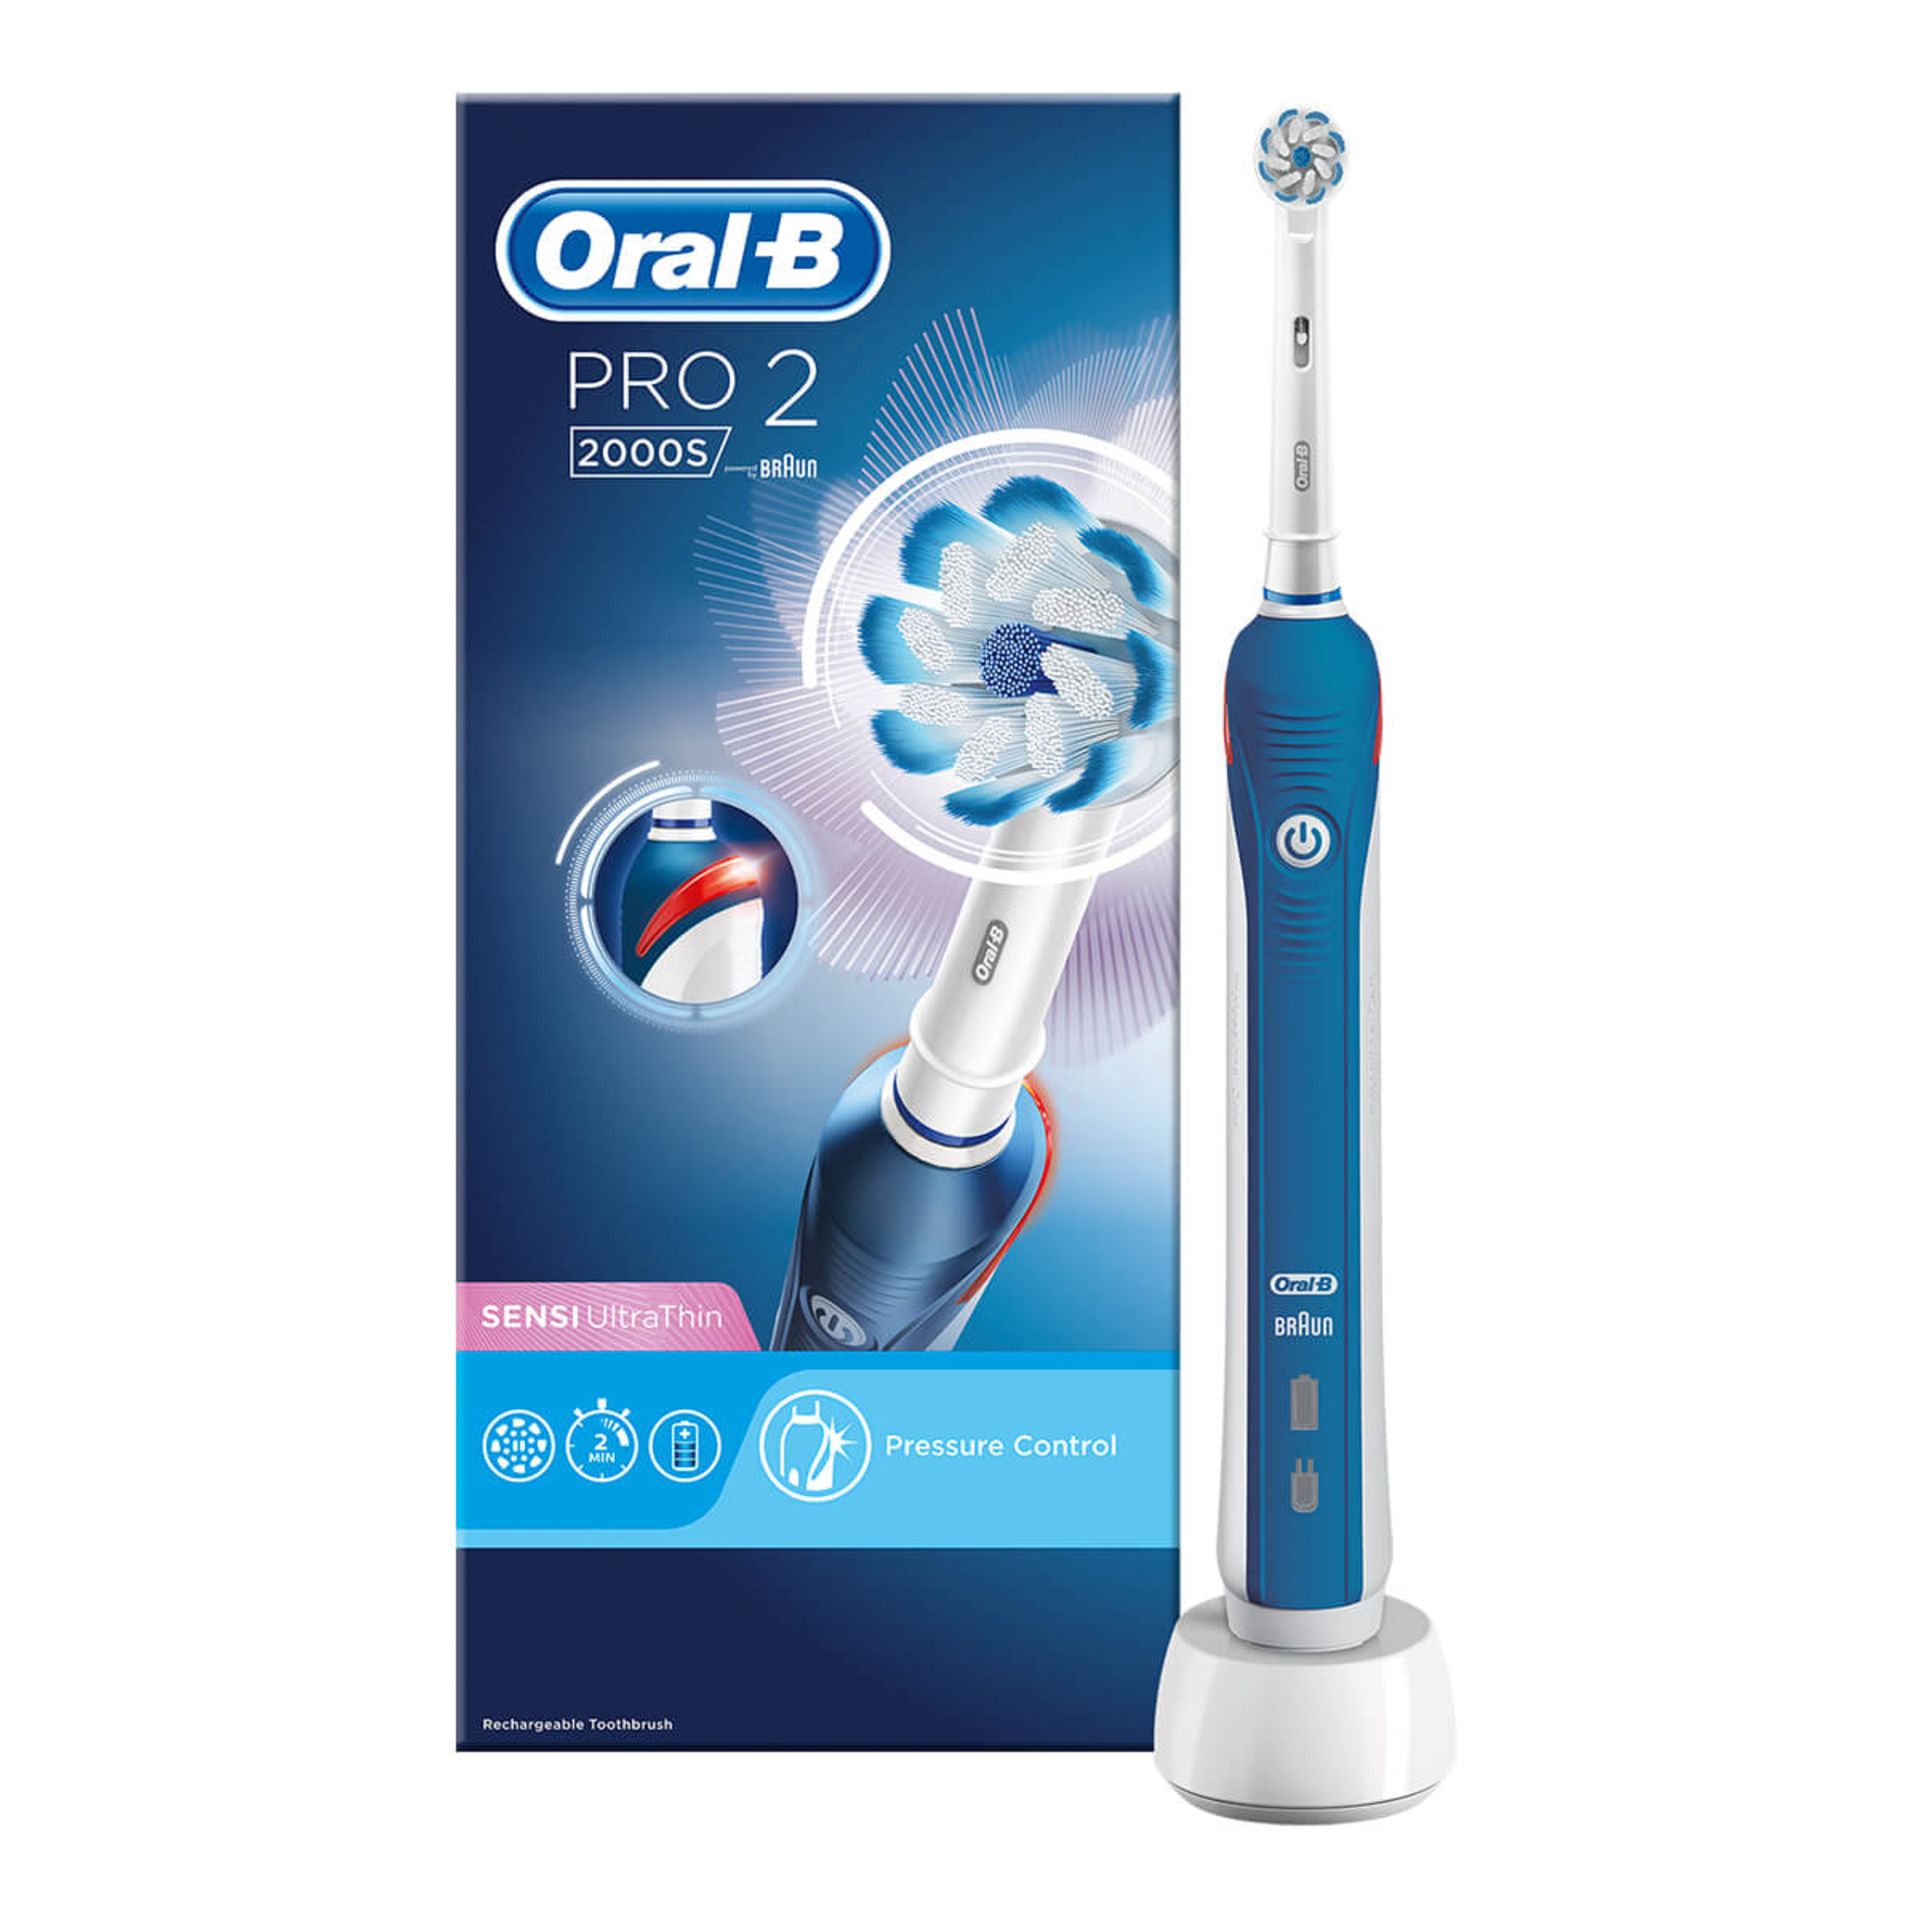 (R14F) 1x Oral B PRO 2 2000 Electric Toothbrush RRP £80. New, Sealed Item With Security Tag Attach